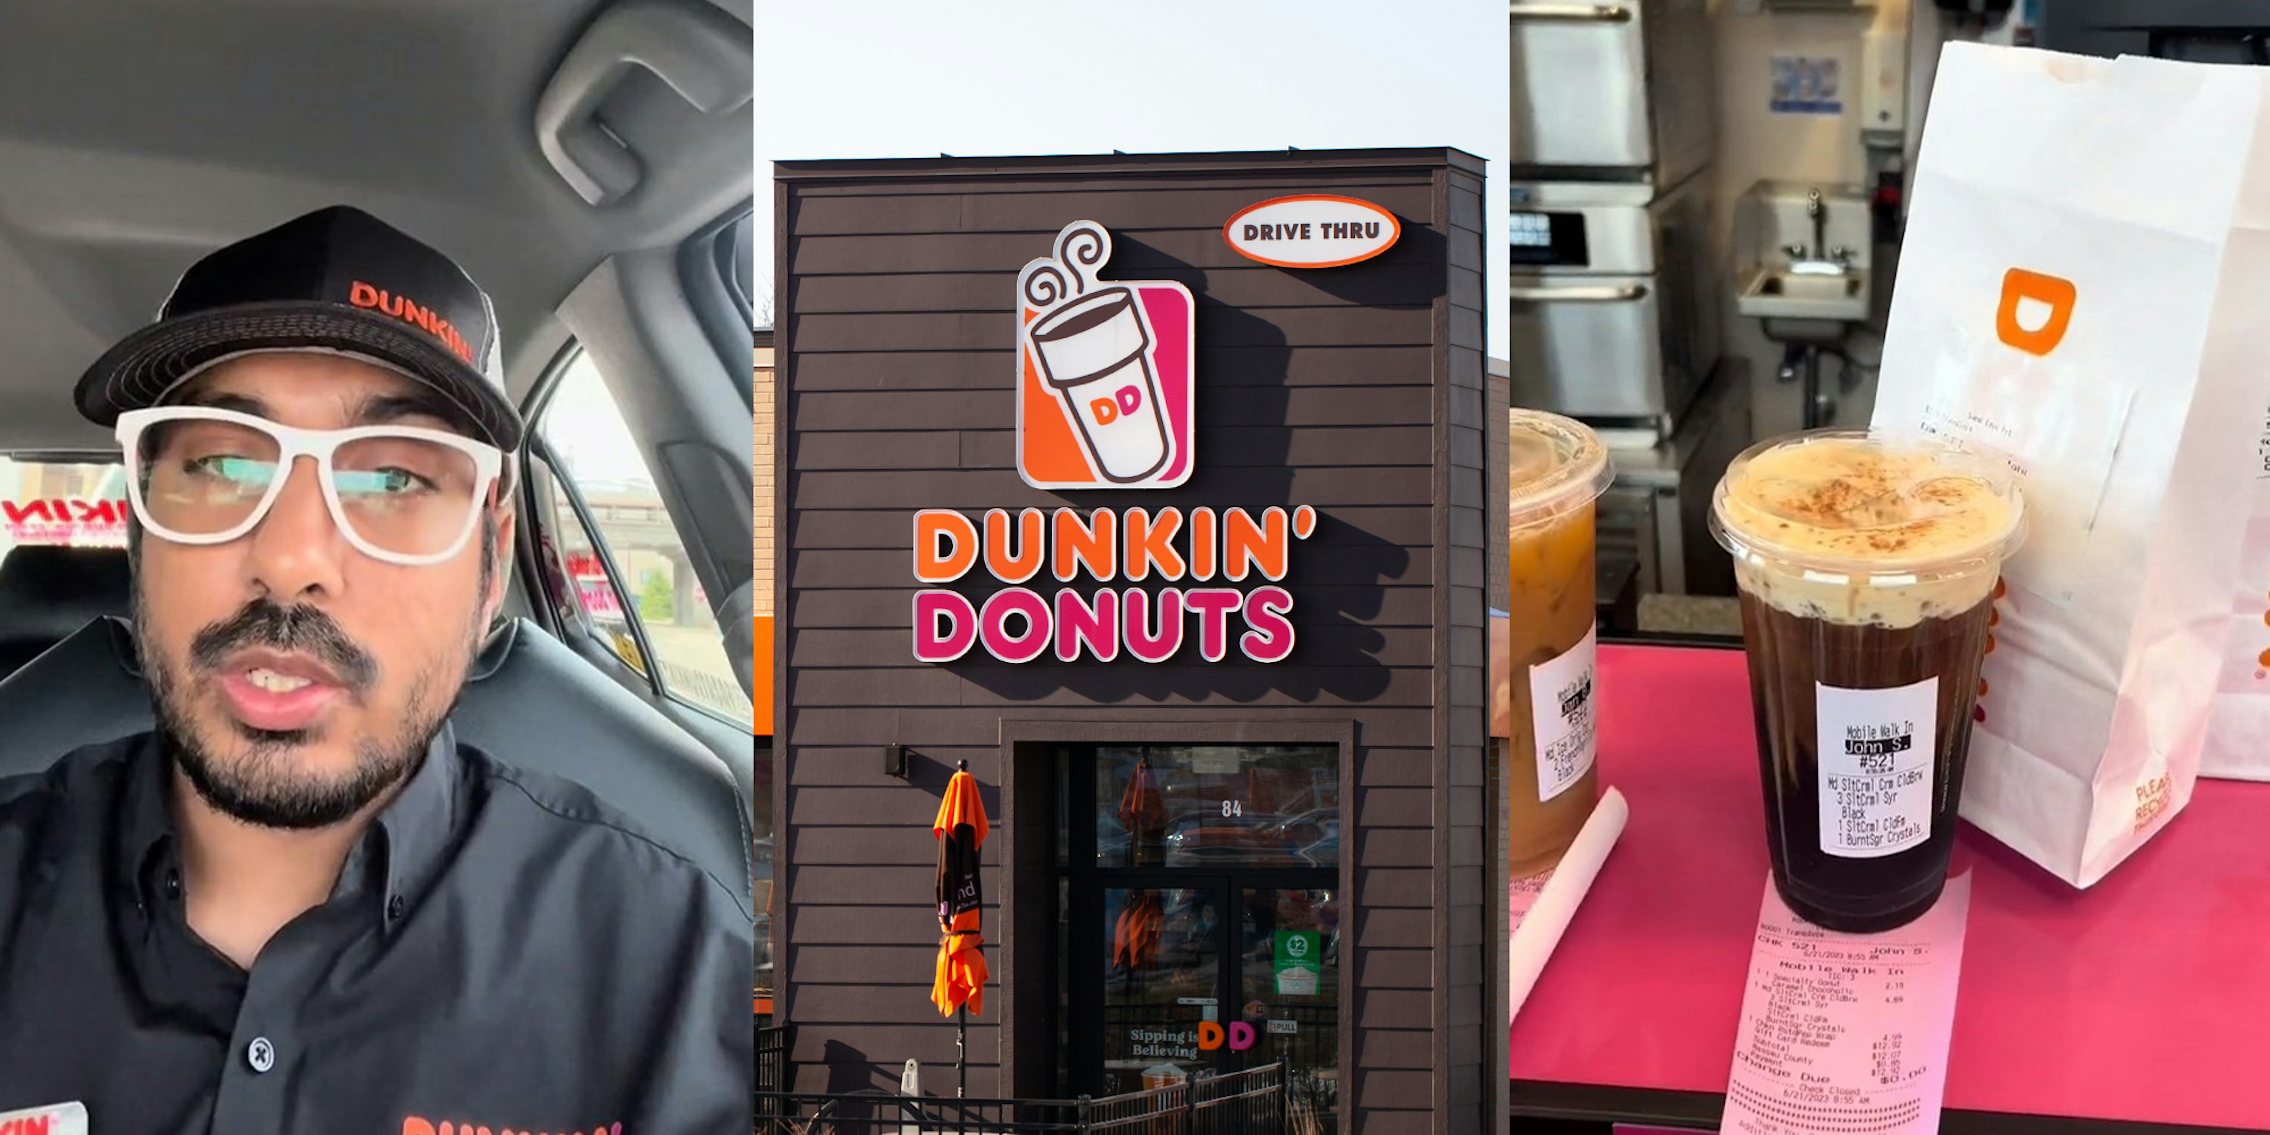 Dunkin' manager orders undercover at another store to check consistency